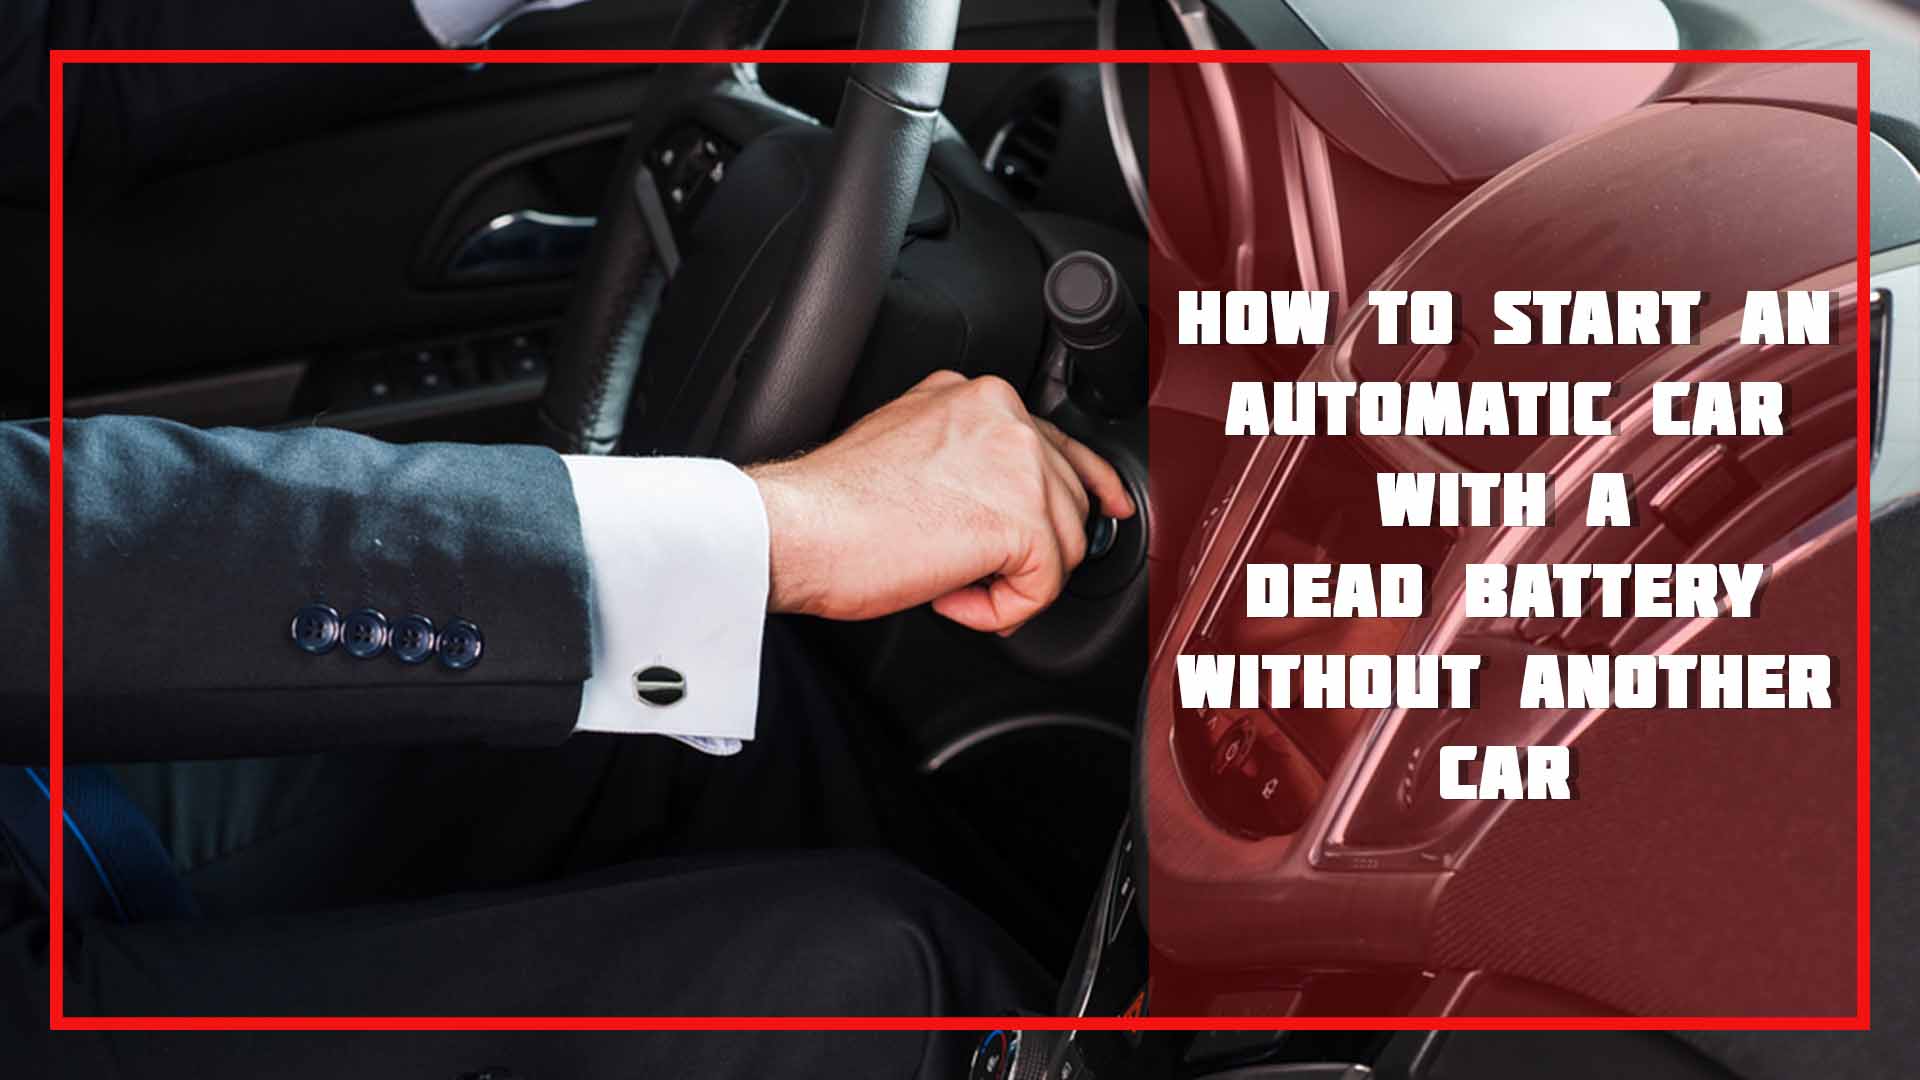 how-to-start-an-automatic-car-with-a-dead-battery-without-another-car